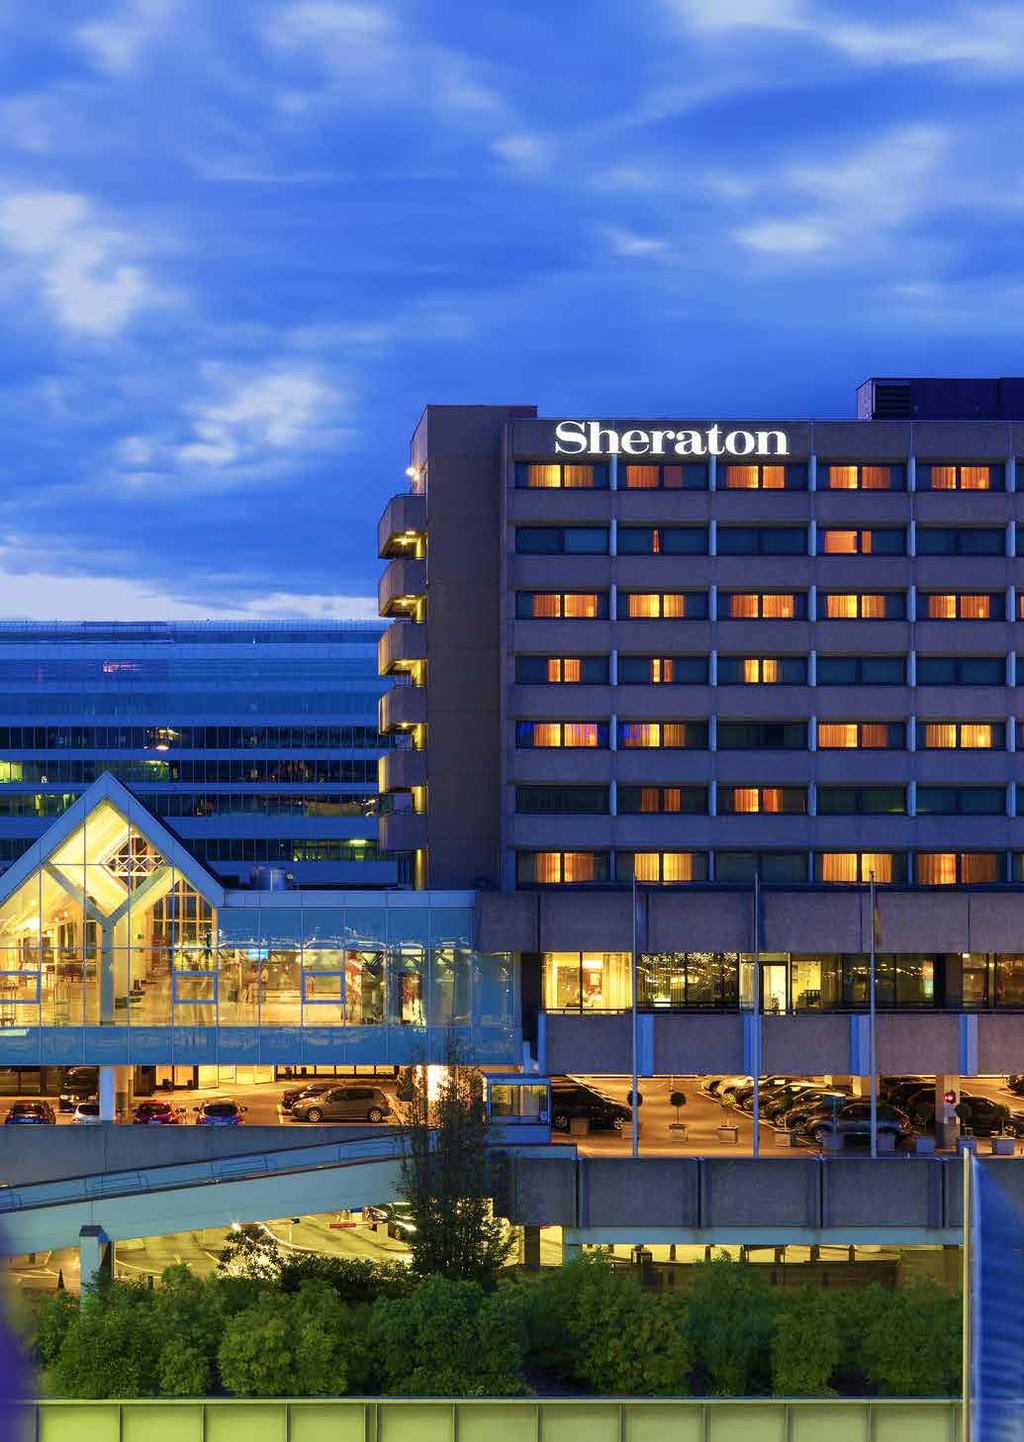 Sheraton Hotel Ample energy for travelers and conference-goers KIRSCH supplies the Sheraton Hotel 1008 rooms, 60 meeting & conference rooms for up to 1200 people, bars and